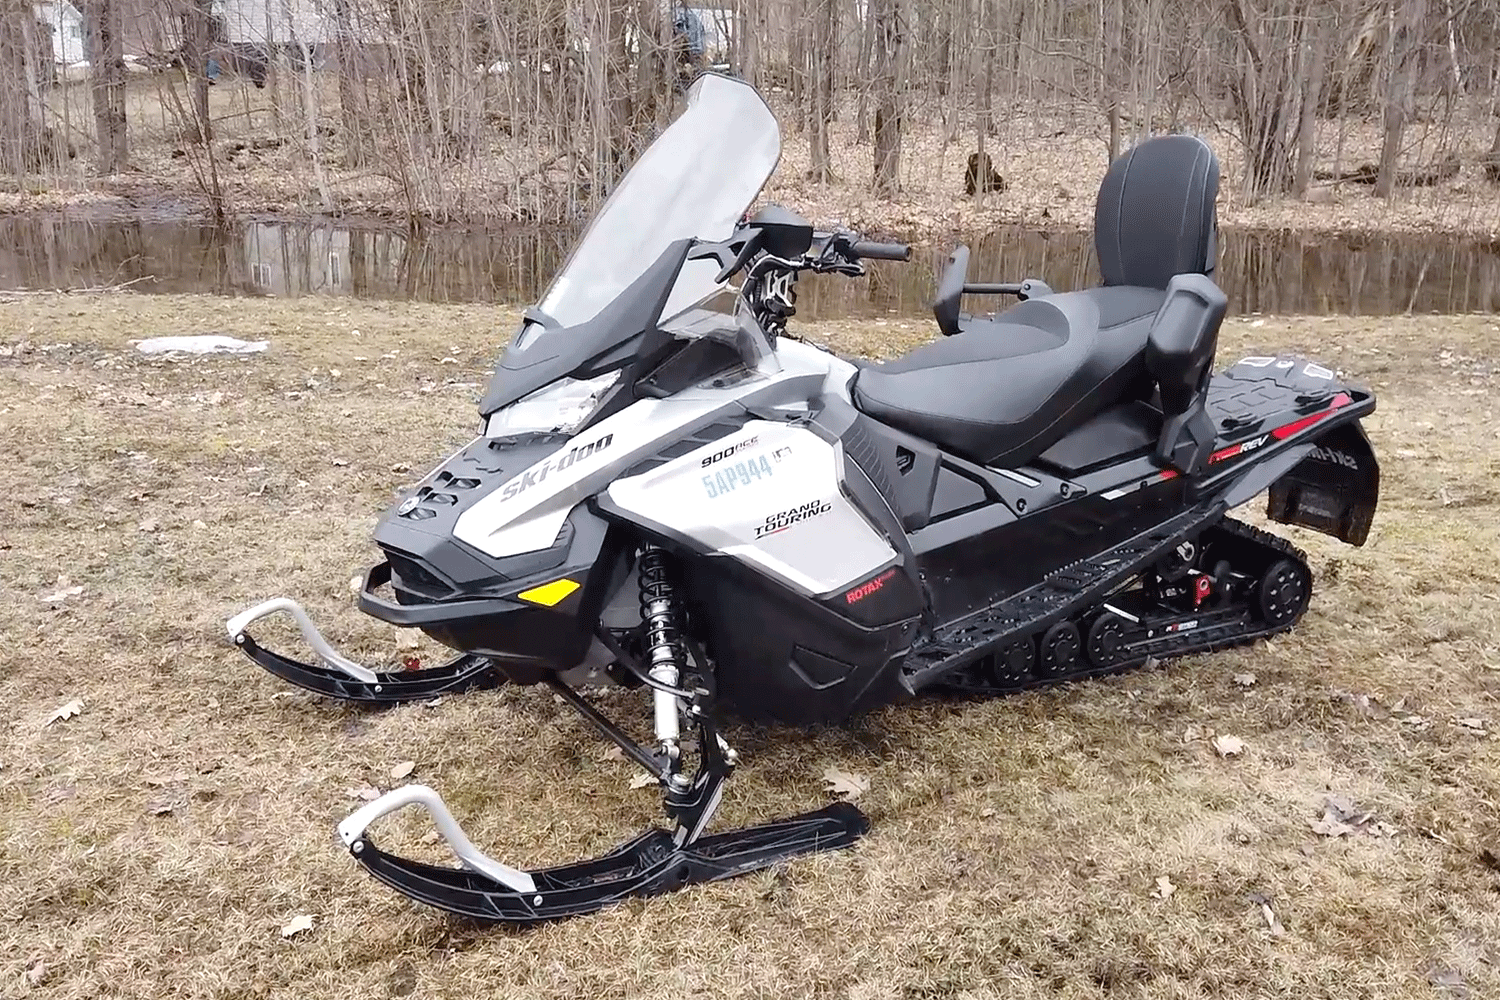 Highs and Lows of the 2019 SkiDoo Grand Touring 900 ACE Turbo